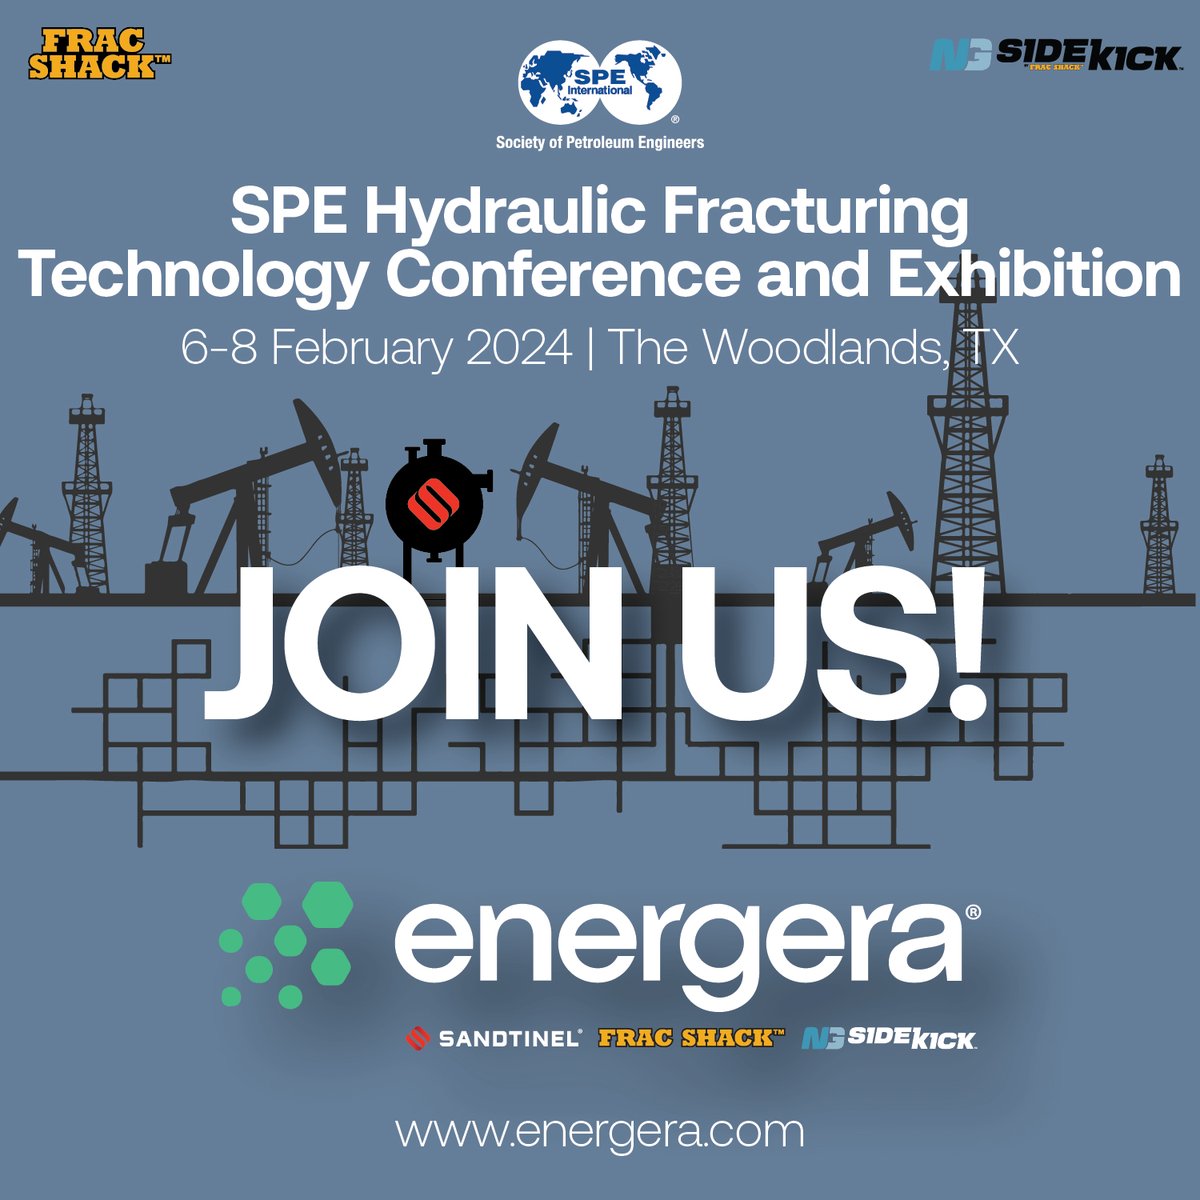 We will be attending the SPE Hydraulic Fracturing Technology Conference and Exhibition this week in #TX. Feel free to reach out if you would like to meet and #network. We hope to see you there! #SPEevents #energy #oilandgas #Energera #FracShack #Sandtinel